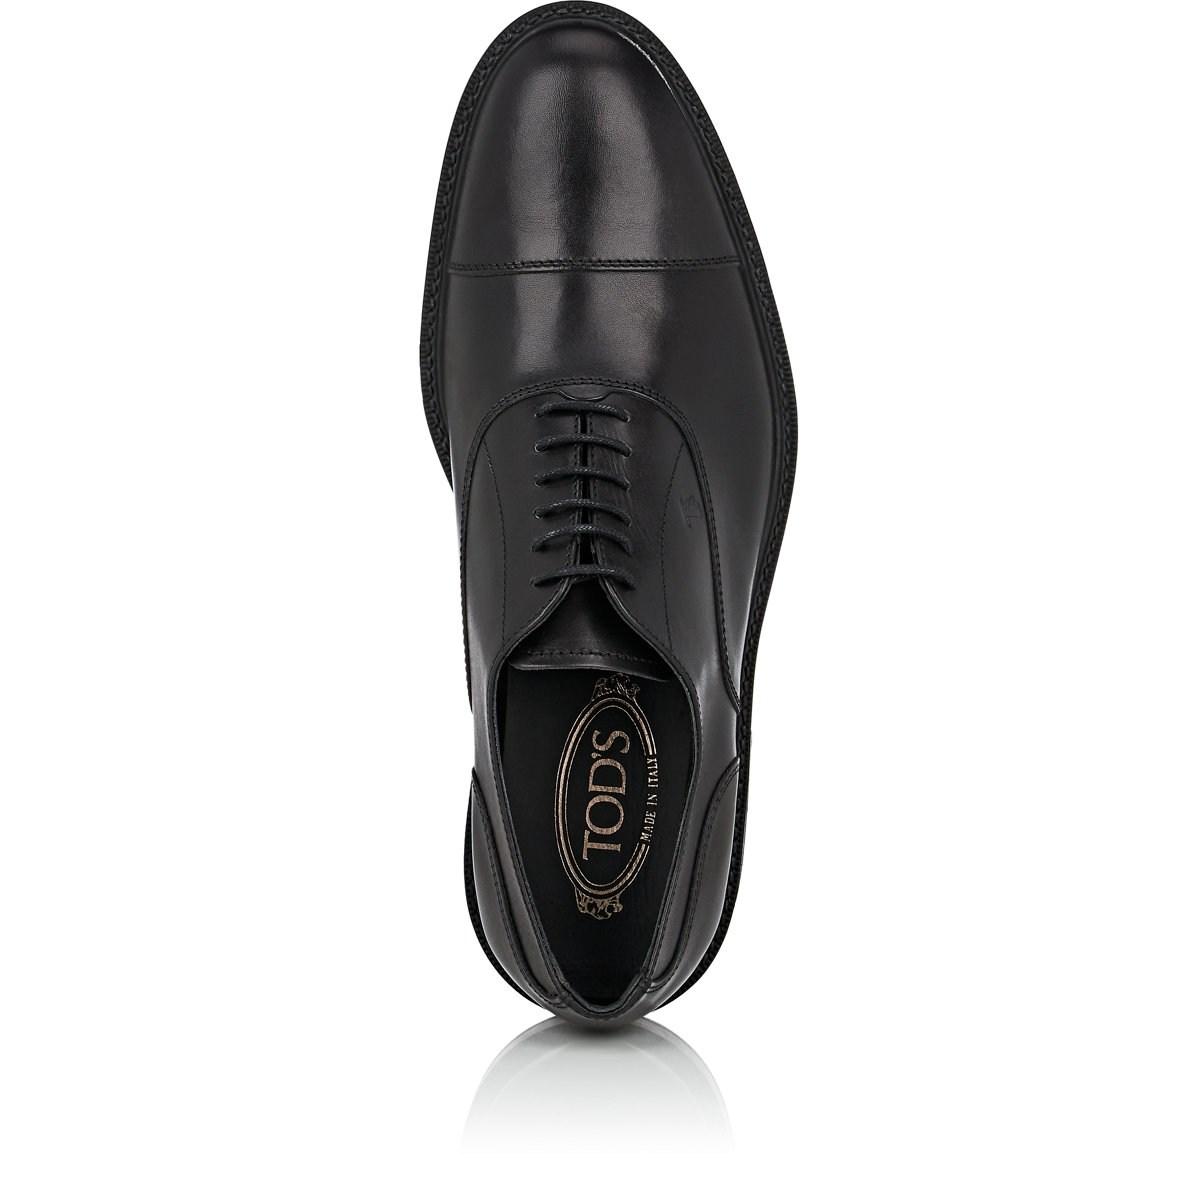 Tod's Cap-toe Leather Balmorals in Black for Men - Lyst